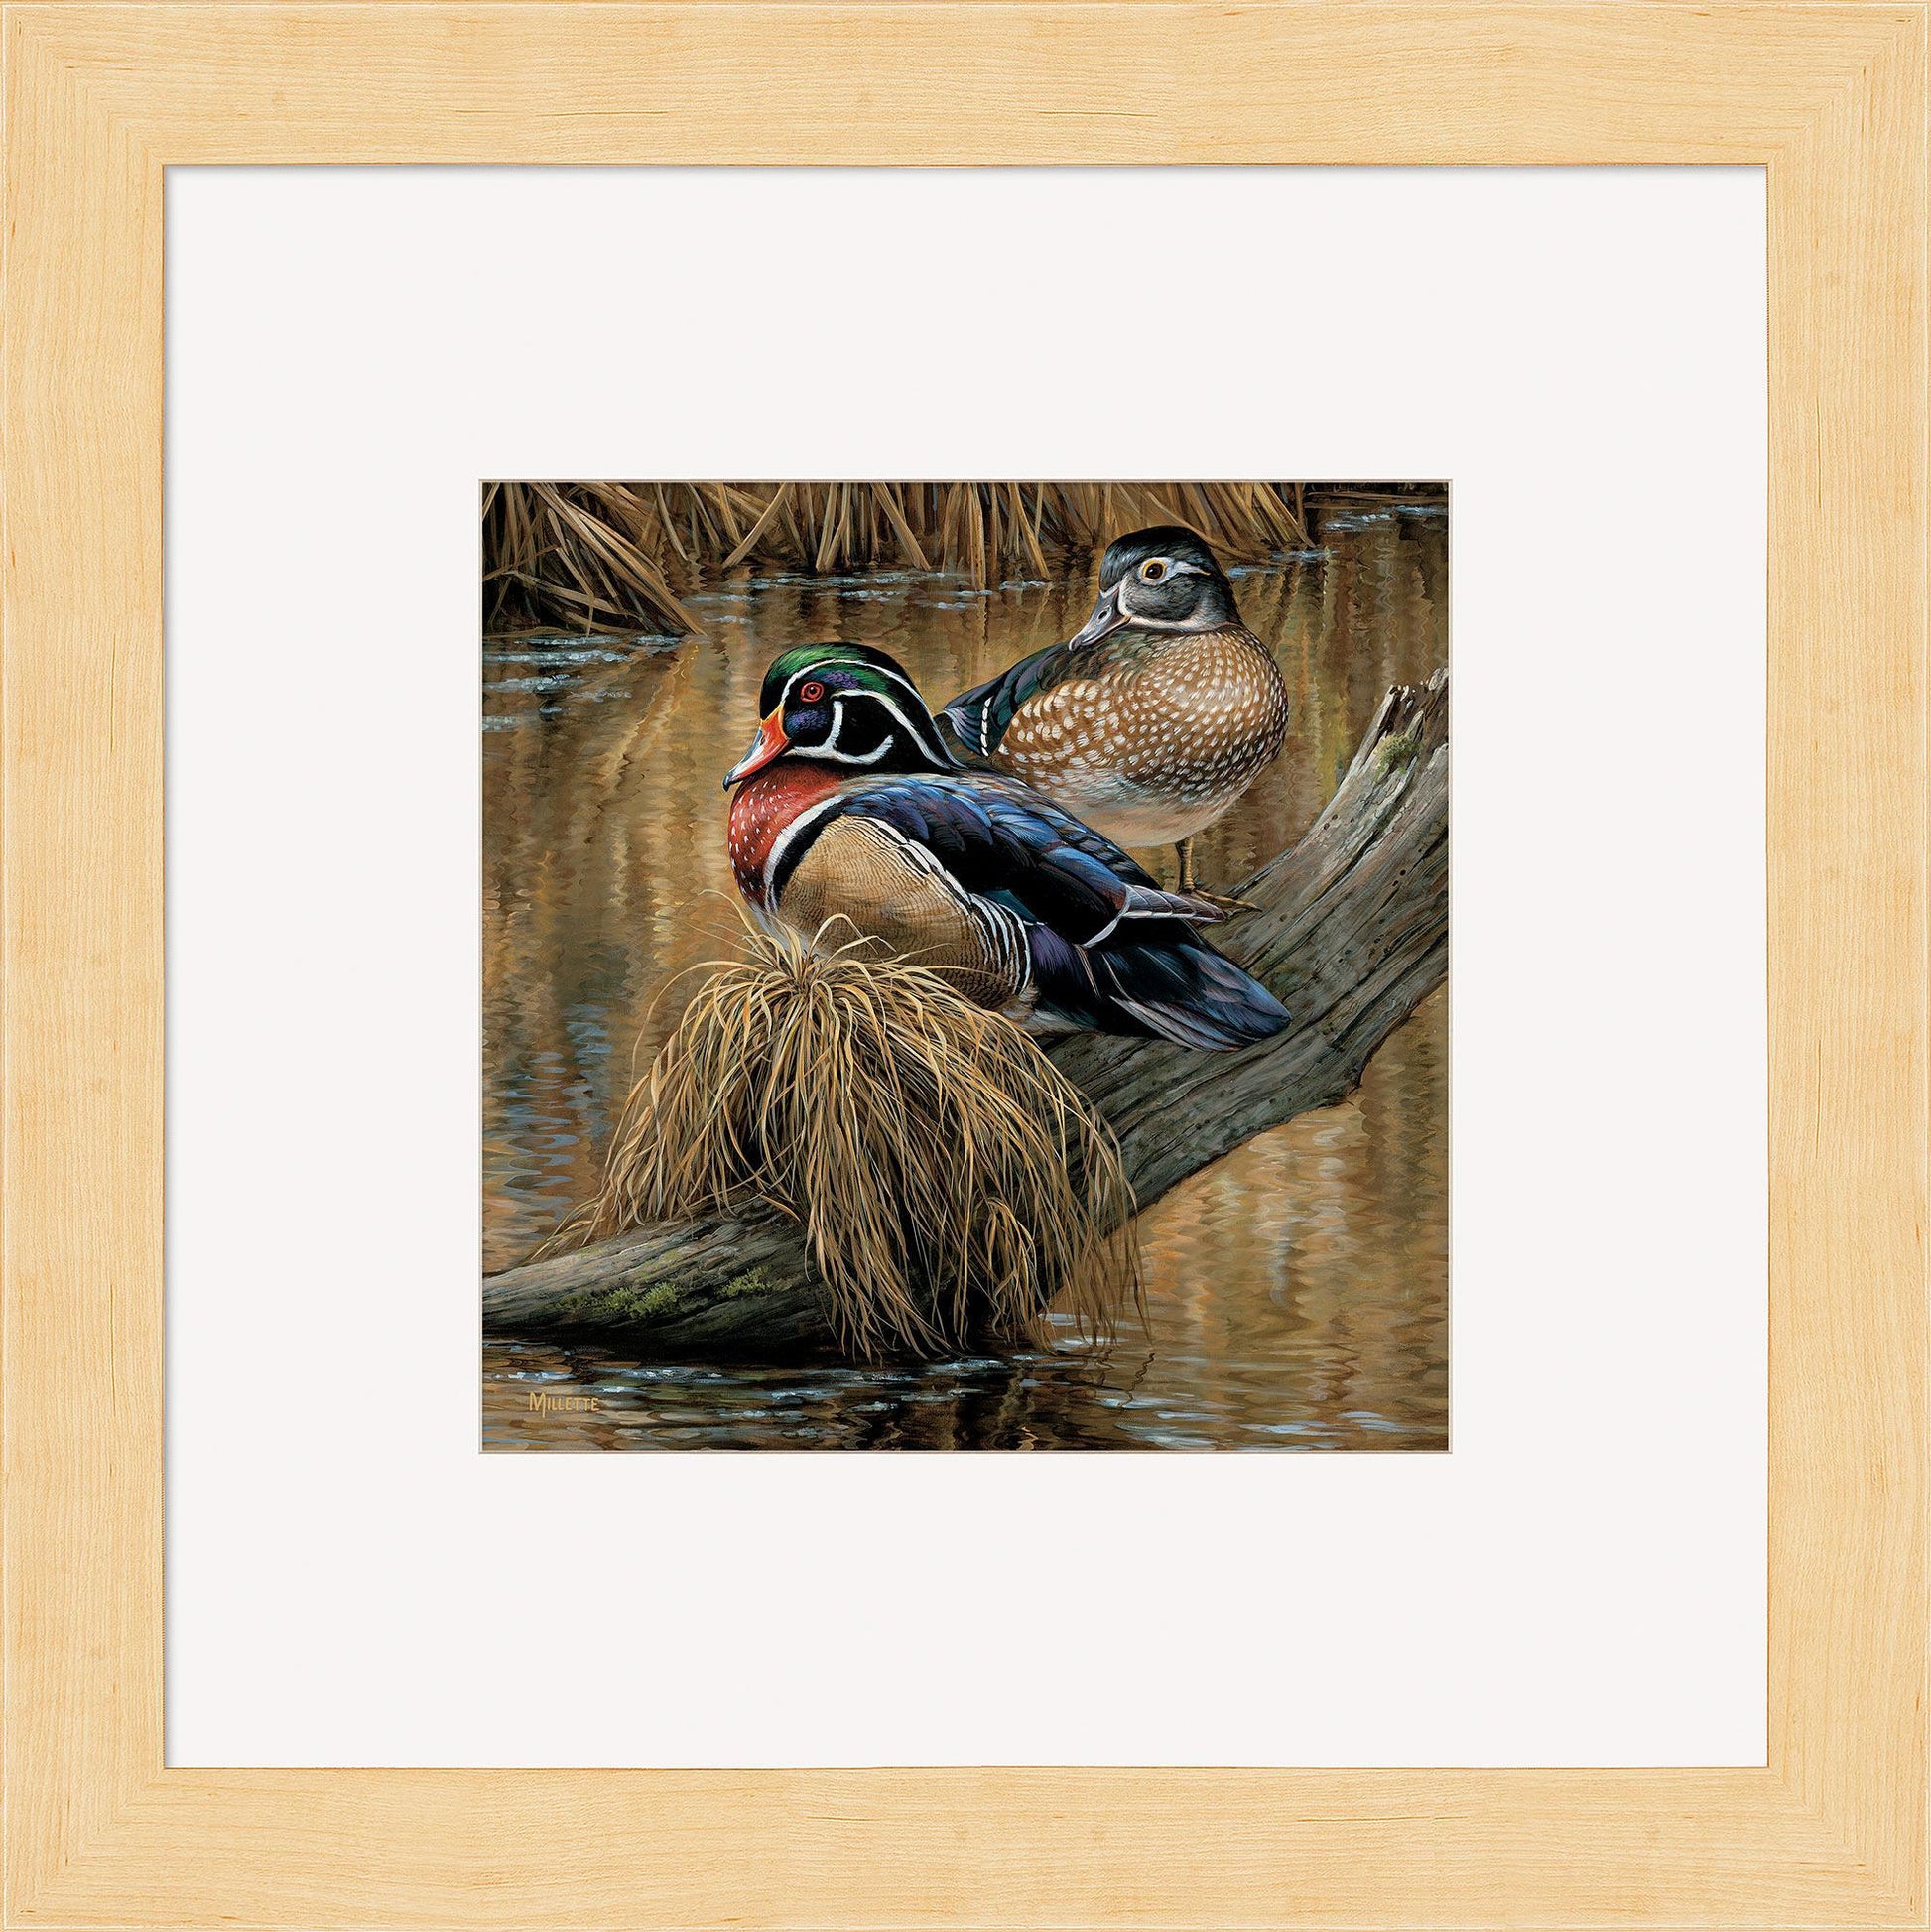 Backwater—Wood Ducks Contempo Square - Wild Wings